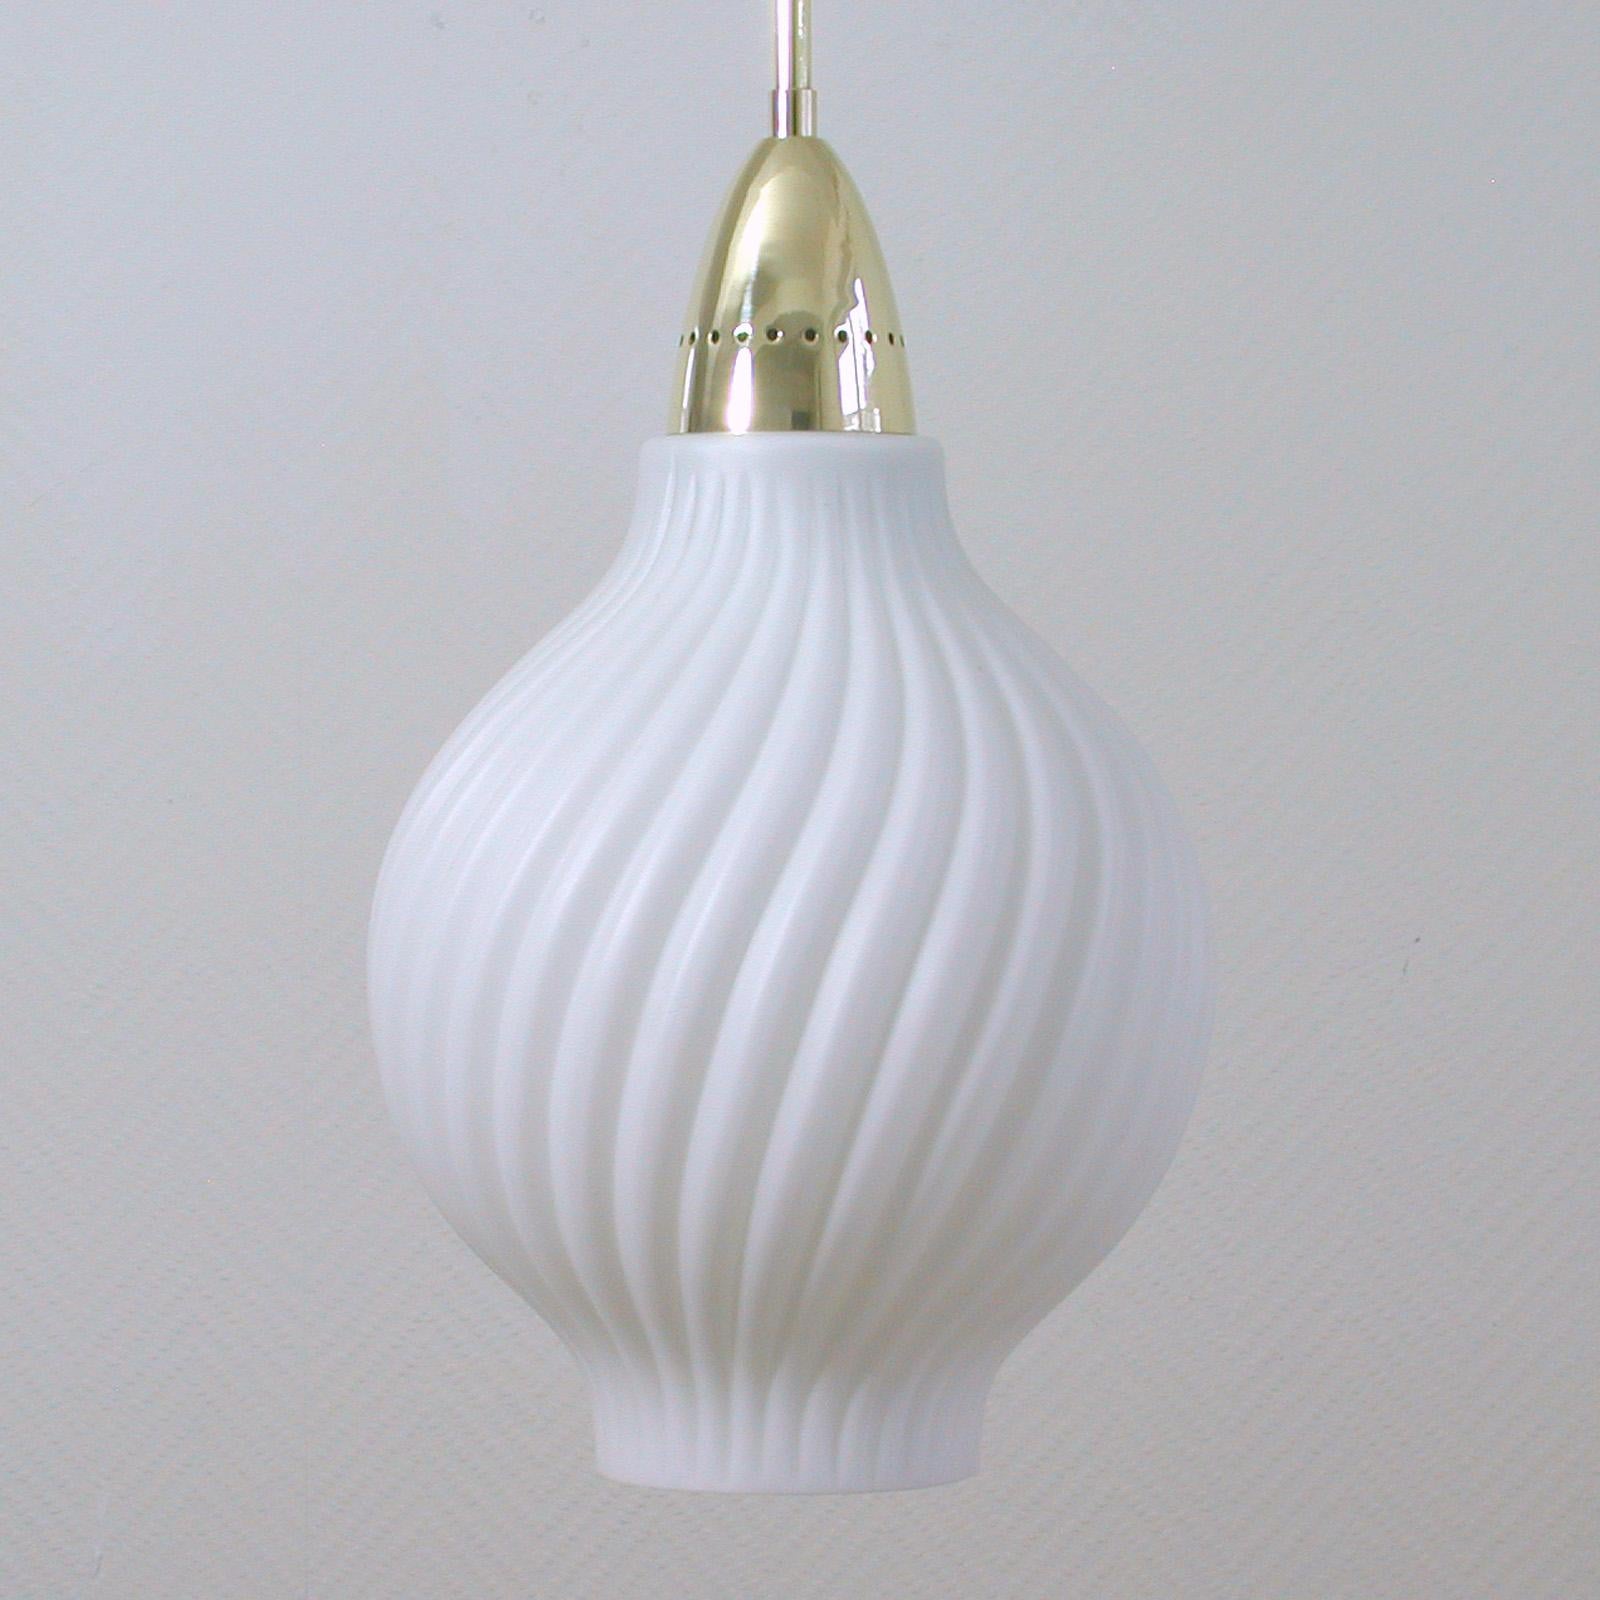 This elegant Italian pendant was designed and manufactured in Italy in the 1950s.

It has got a beautiful white swirling ribbed glass lamp shade with brass top, brass lamp rod and brass canopy. There is one E27 socket inside the shade. It has been